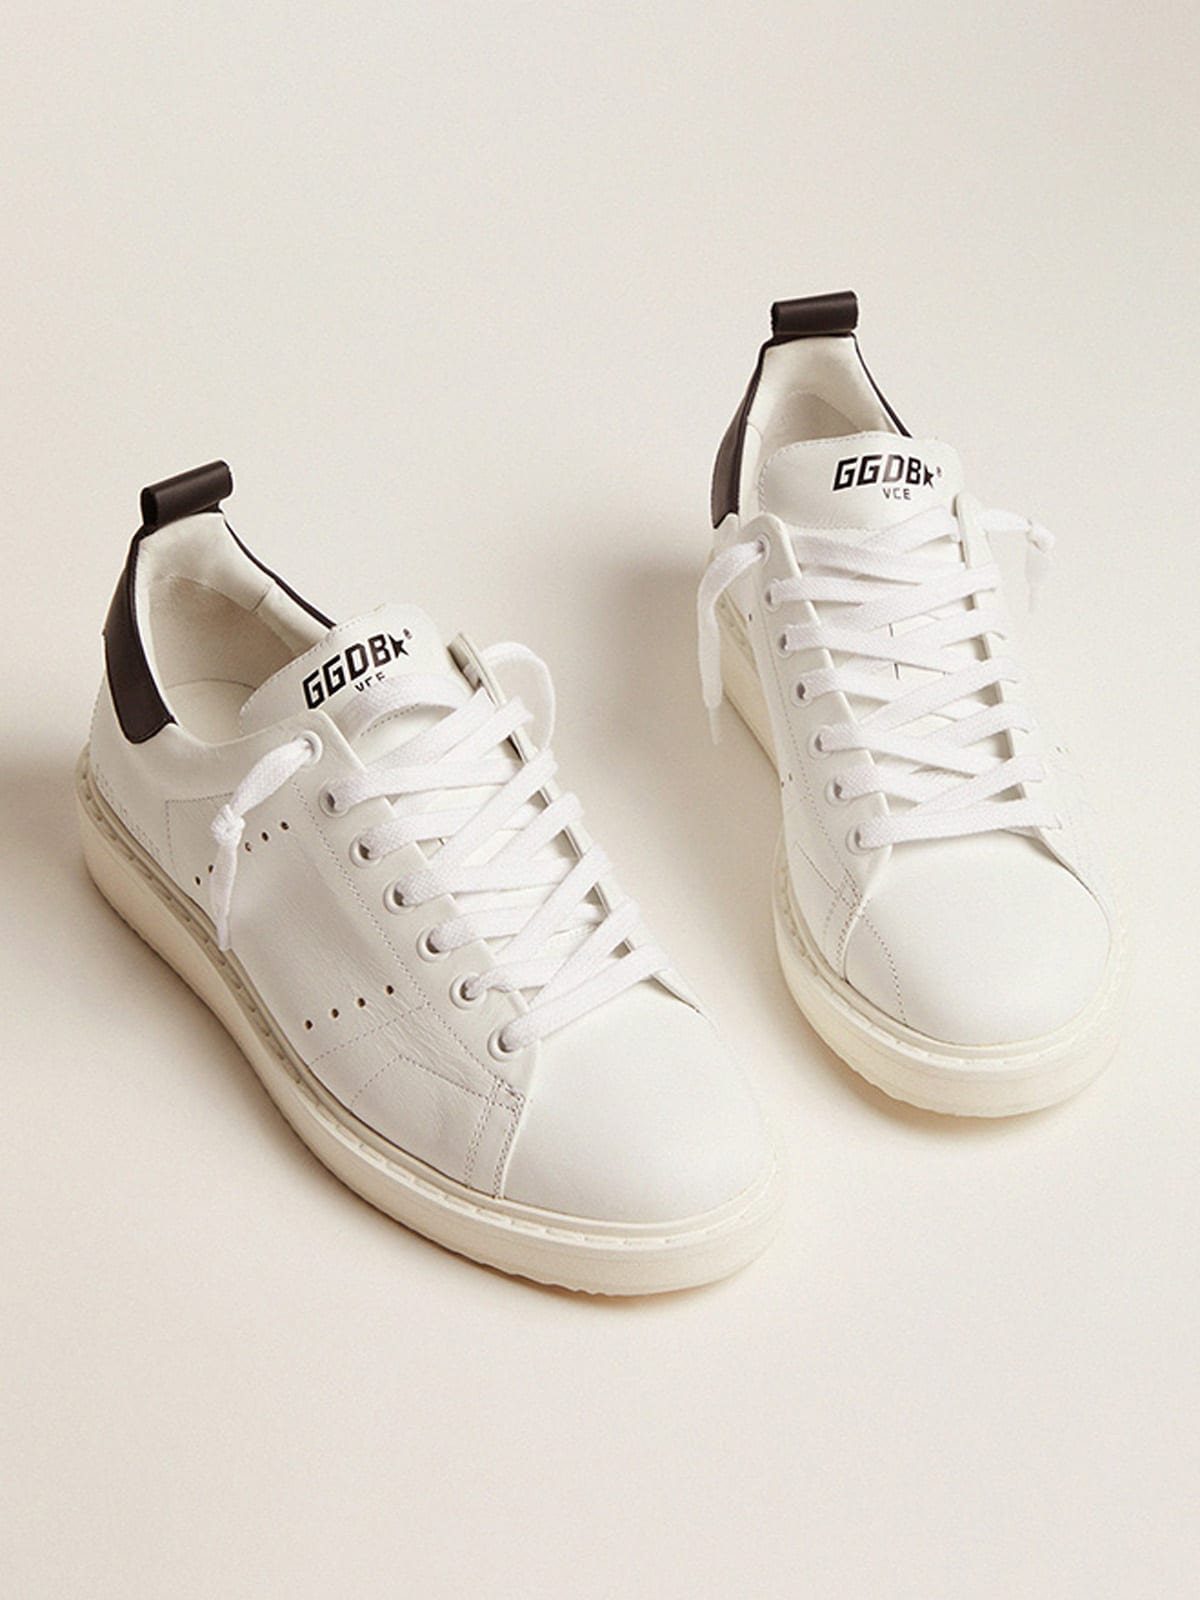 Golden Goose - Starter sneakers in white leather with black leather heel tab in 